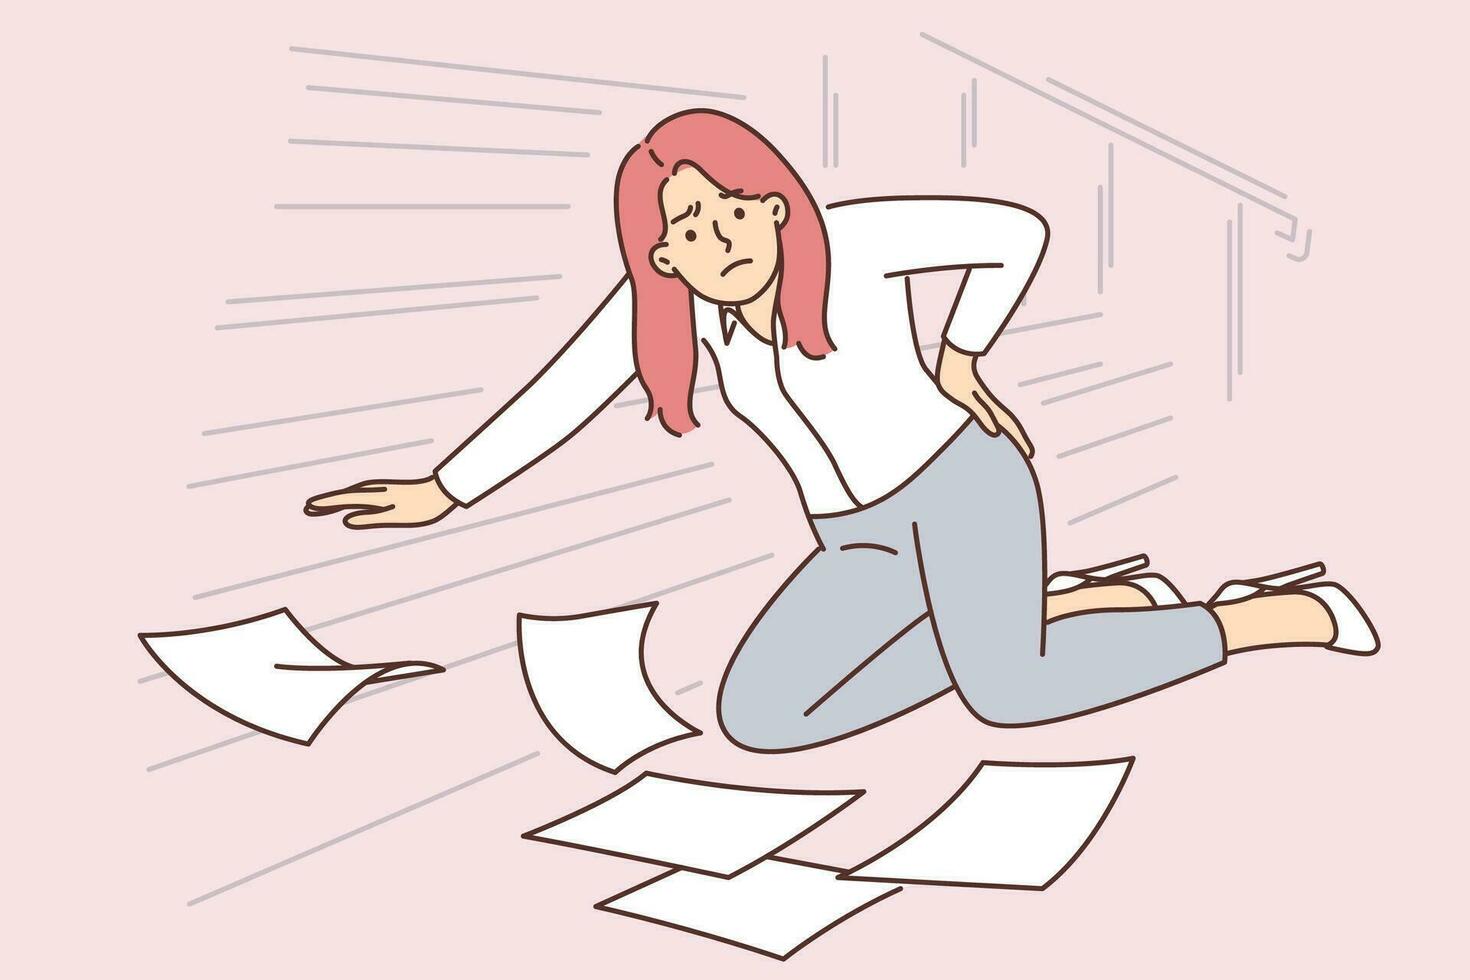 Woman office worker fell down stairs and injured back dropping papers on floor. Businesswoman fell due to excessive haste associated with strict deadlines or fatigue from overwork. vector